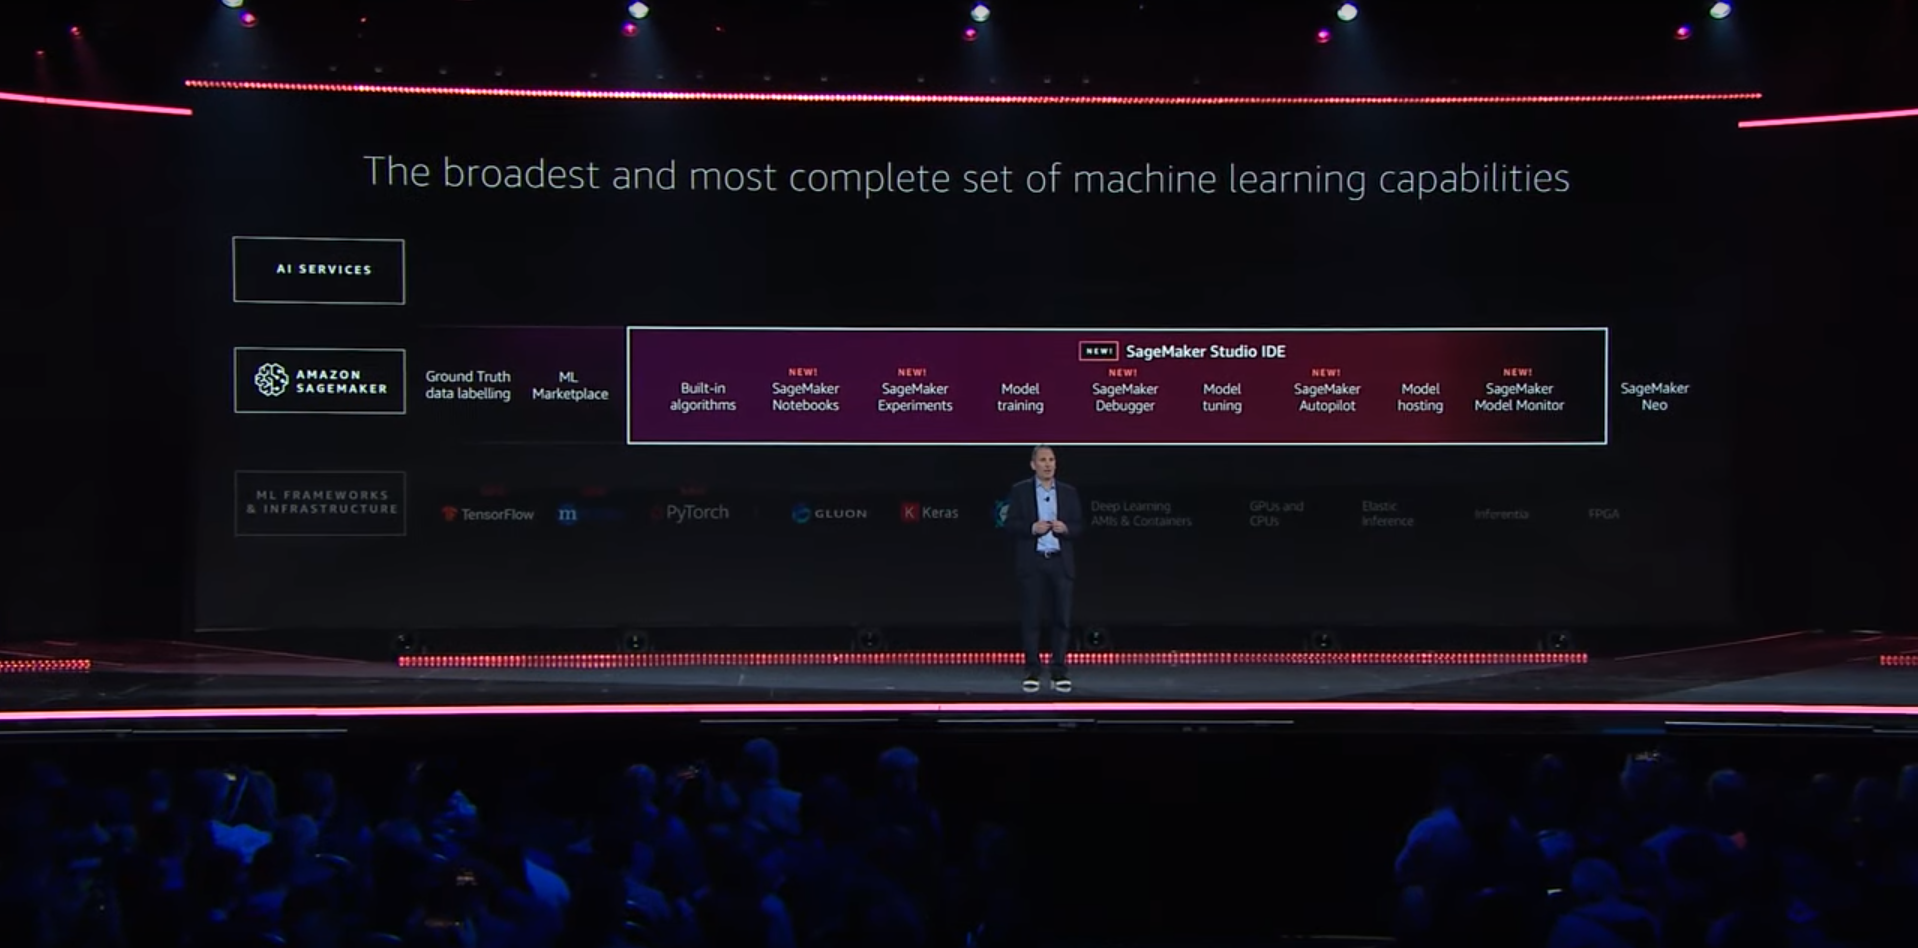 AWS CEO Andy Jassy explaining new SageMaker features at AWS re:Invent 2019